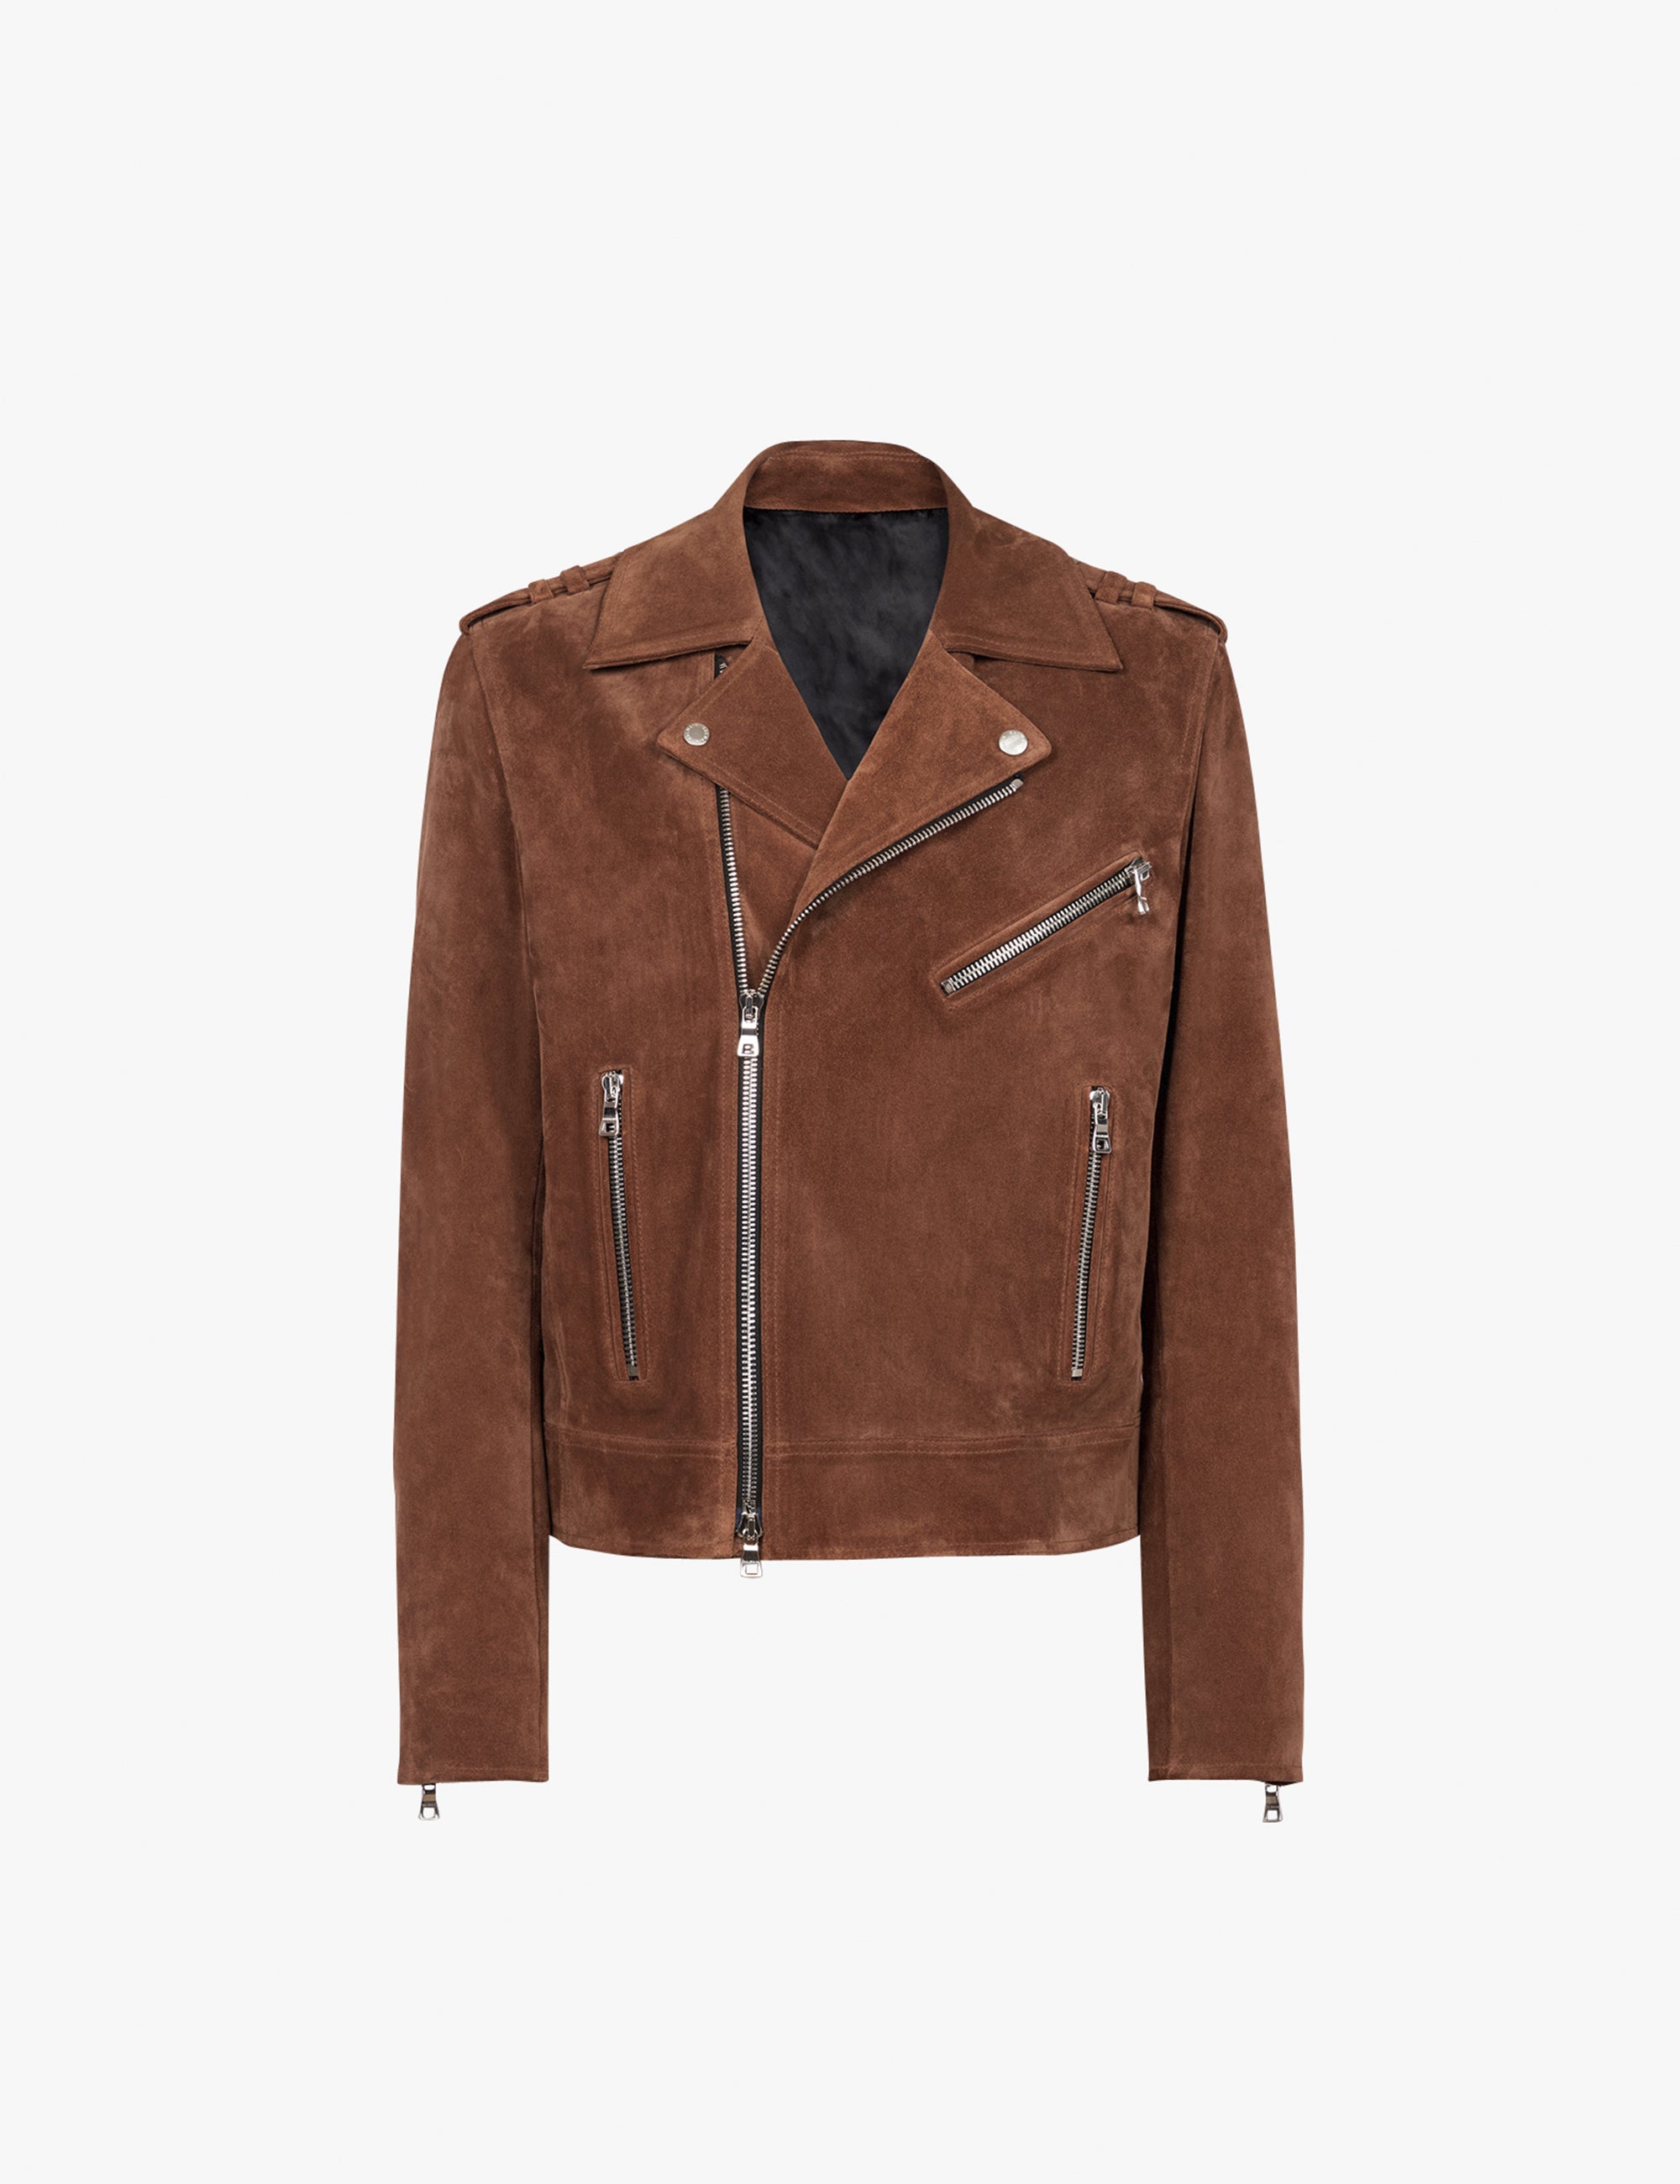 Balmain x The They Fall Leather Biker Fringed